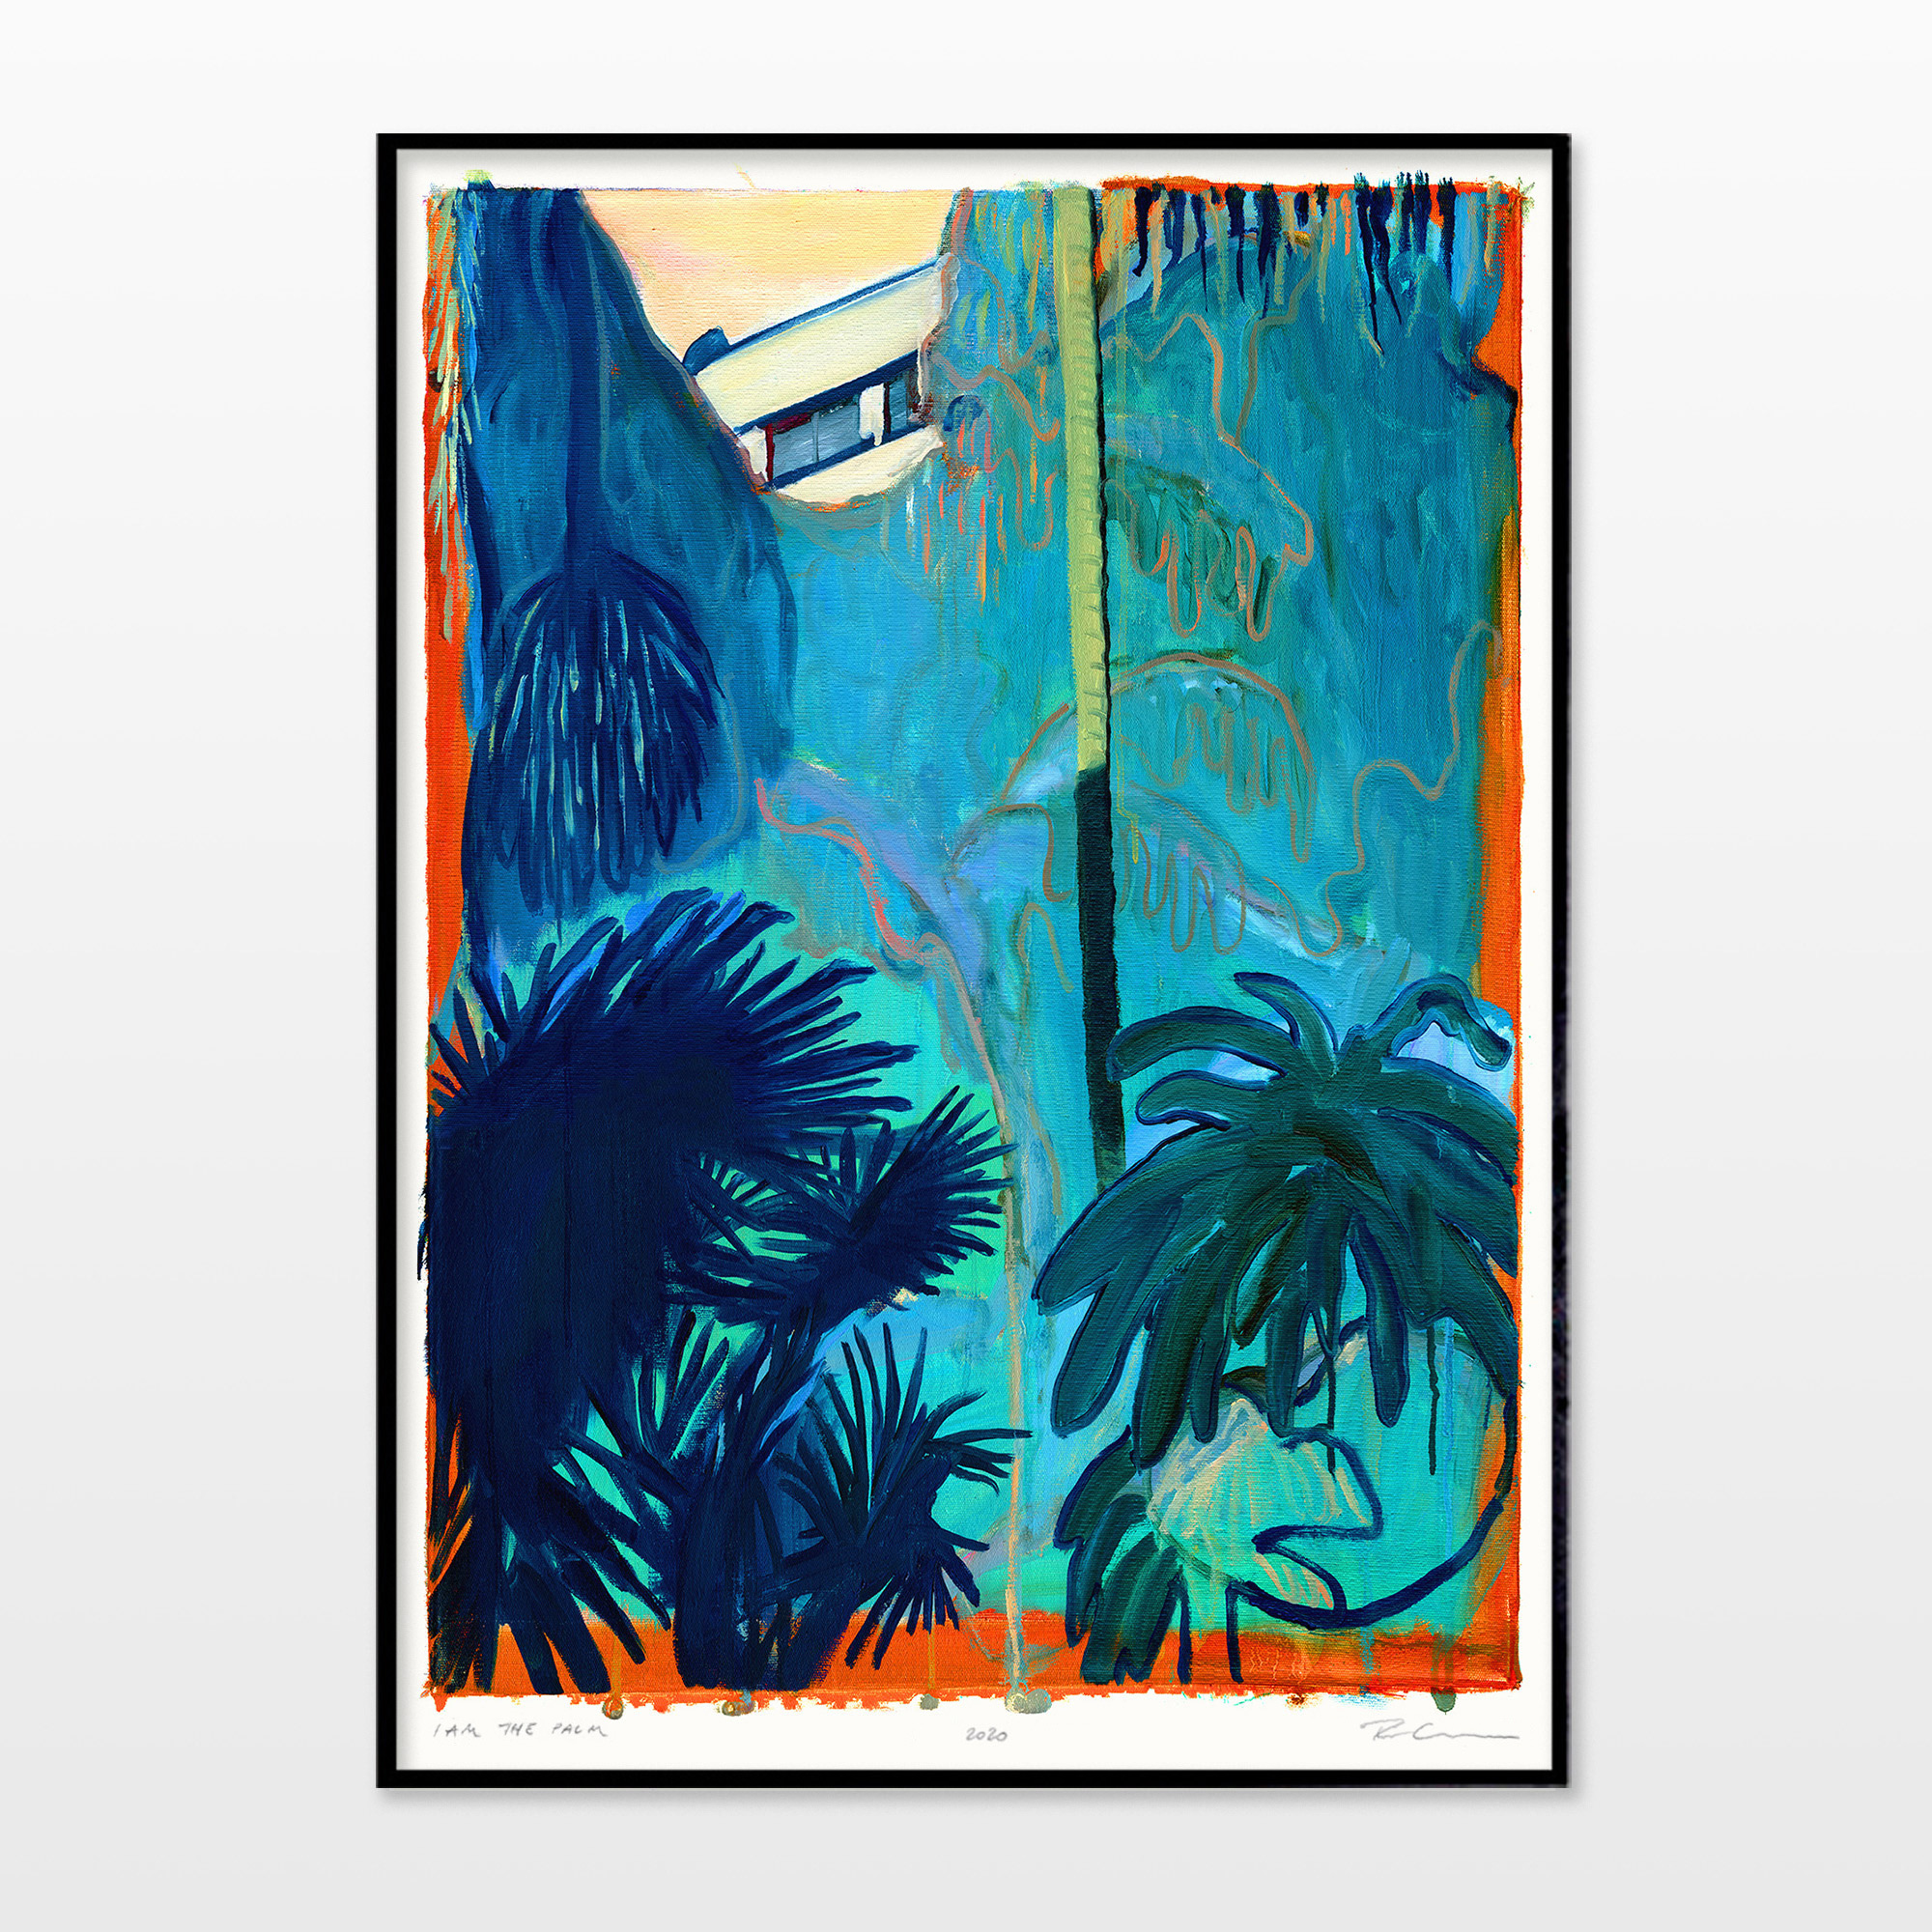 posters-prints, giclee-print, aesthetic, colorful, figurative, illustrative, landscape, botany, nature, blue, green, orange, turquoise, ink, paper, beautiful, contemporary-art, danish, design, forest, interior, interior-design, modern, modern-art, nordic, plants, posters, prints, scandinavien, Buy original high quality art. Paintings, drawings, limited edition prints & posters by talented artists.